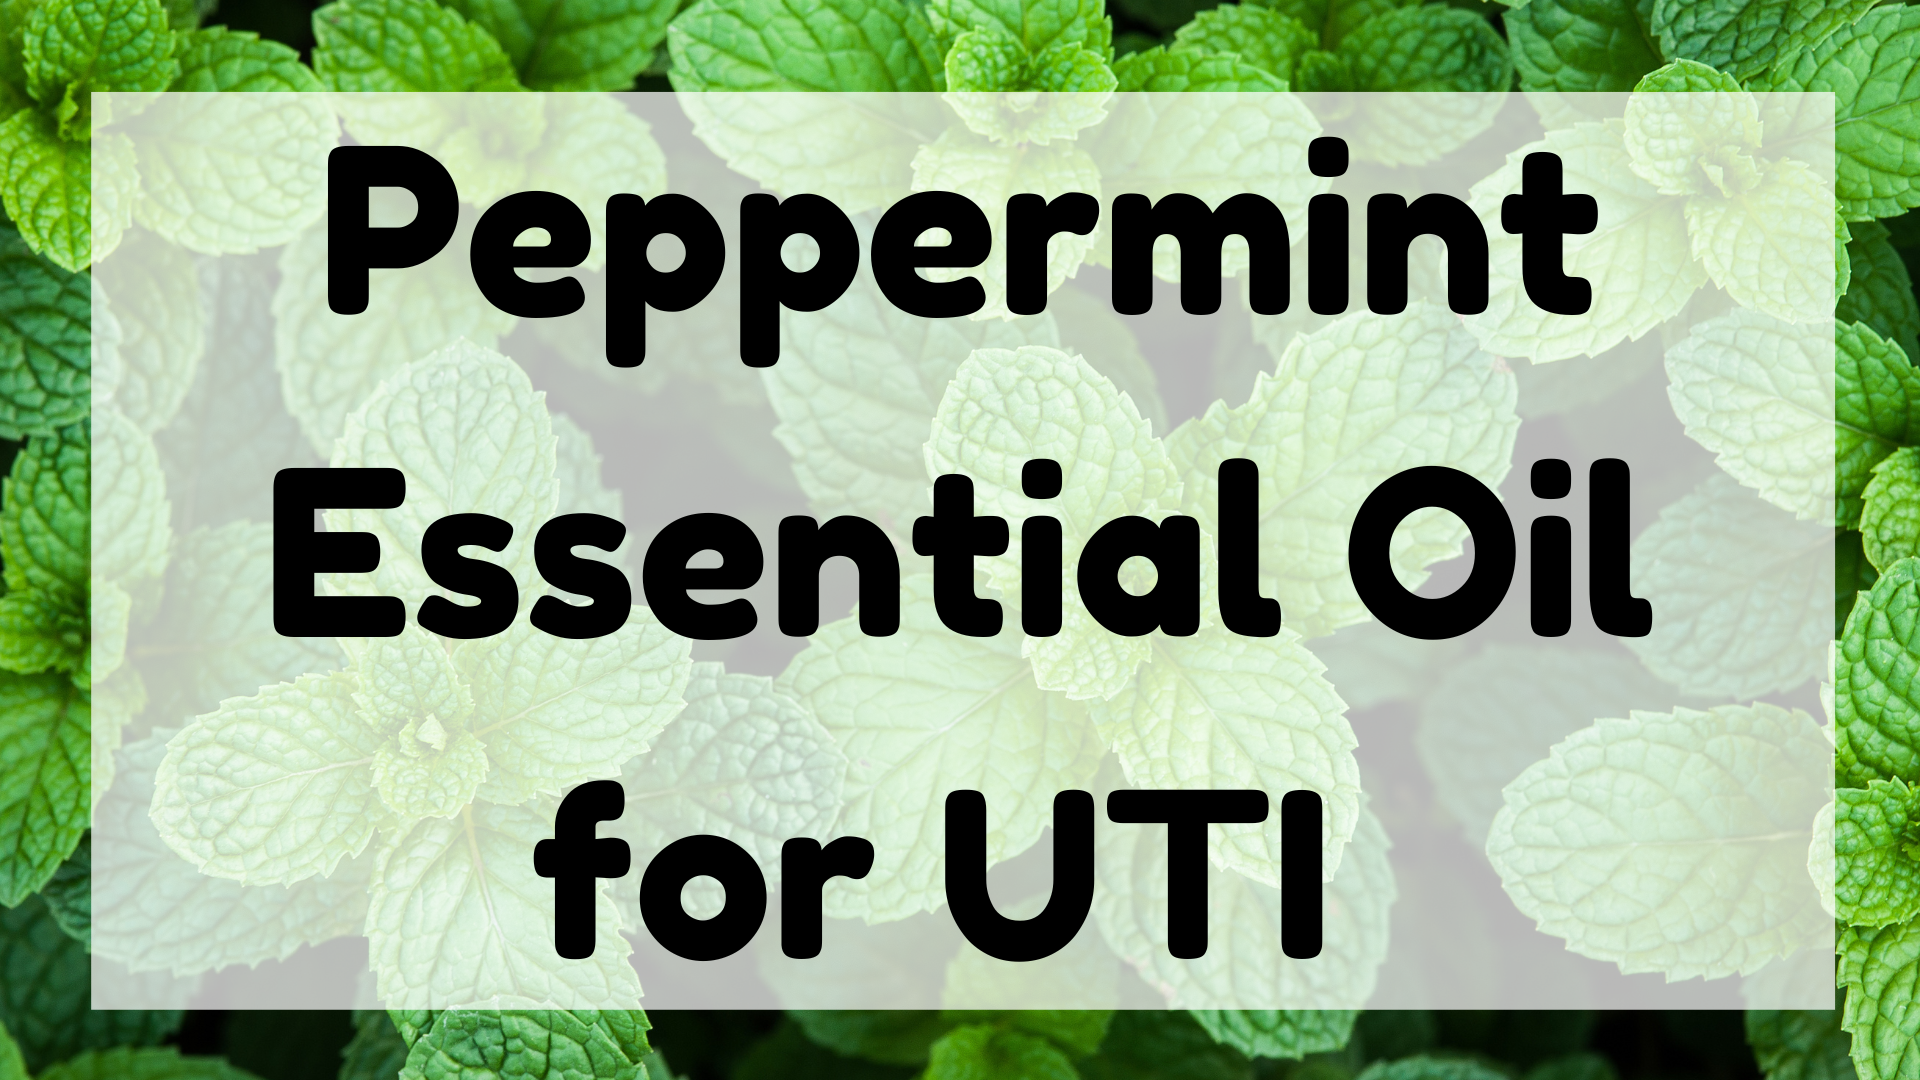 Peppermint Essential Oil for Uti featured image